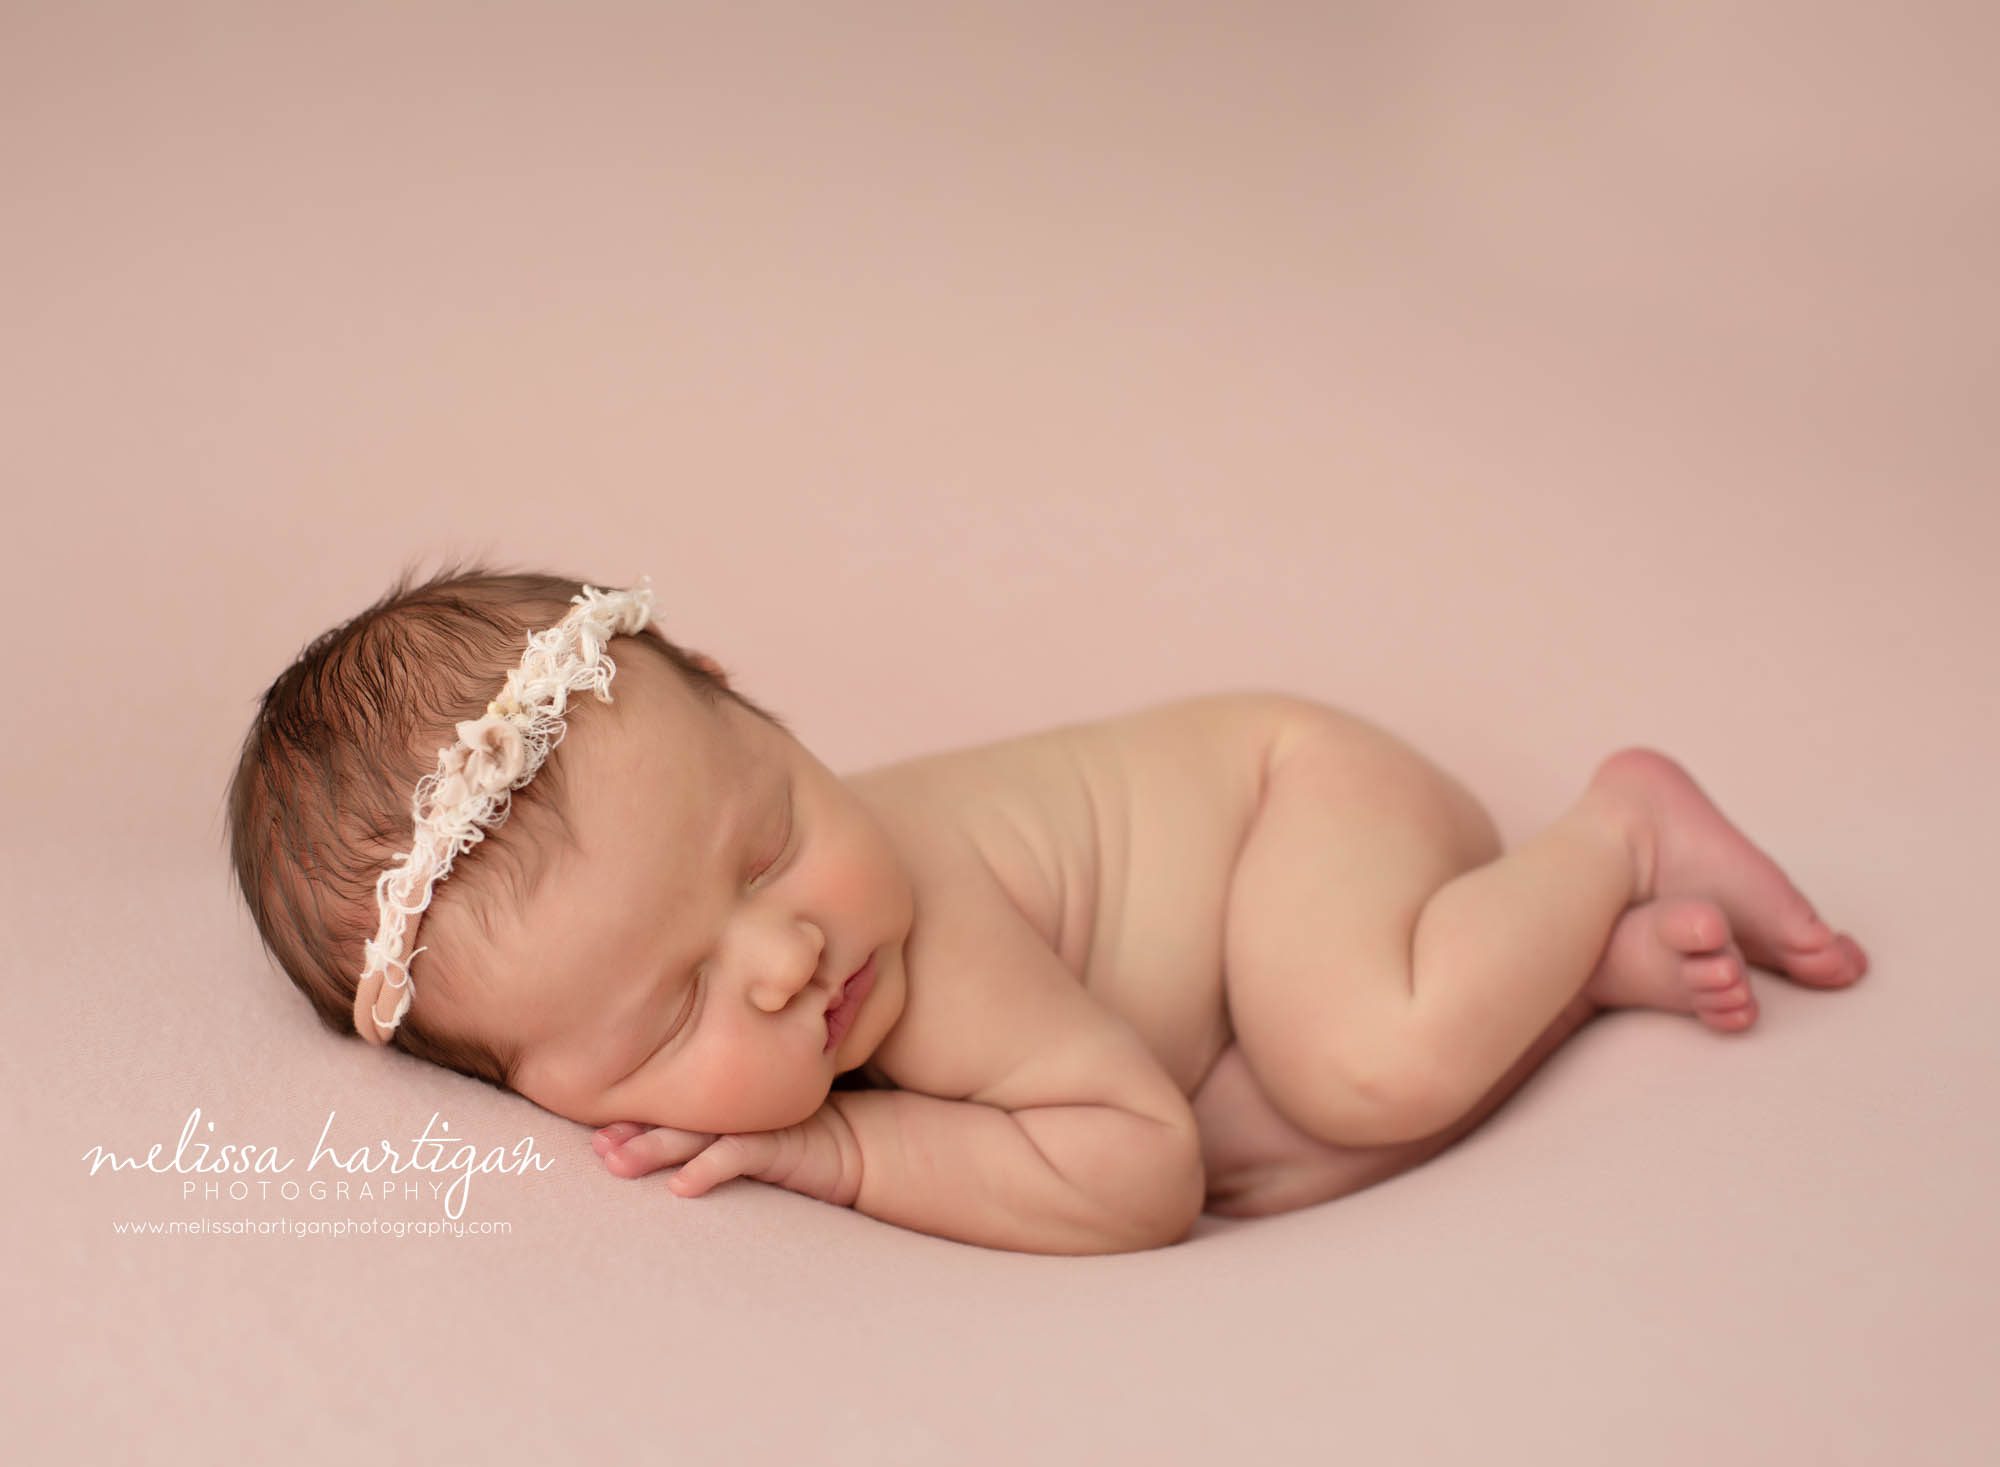 newborn baby girl sleeping posed side with white and cream headband on CT newborn photography session